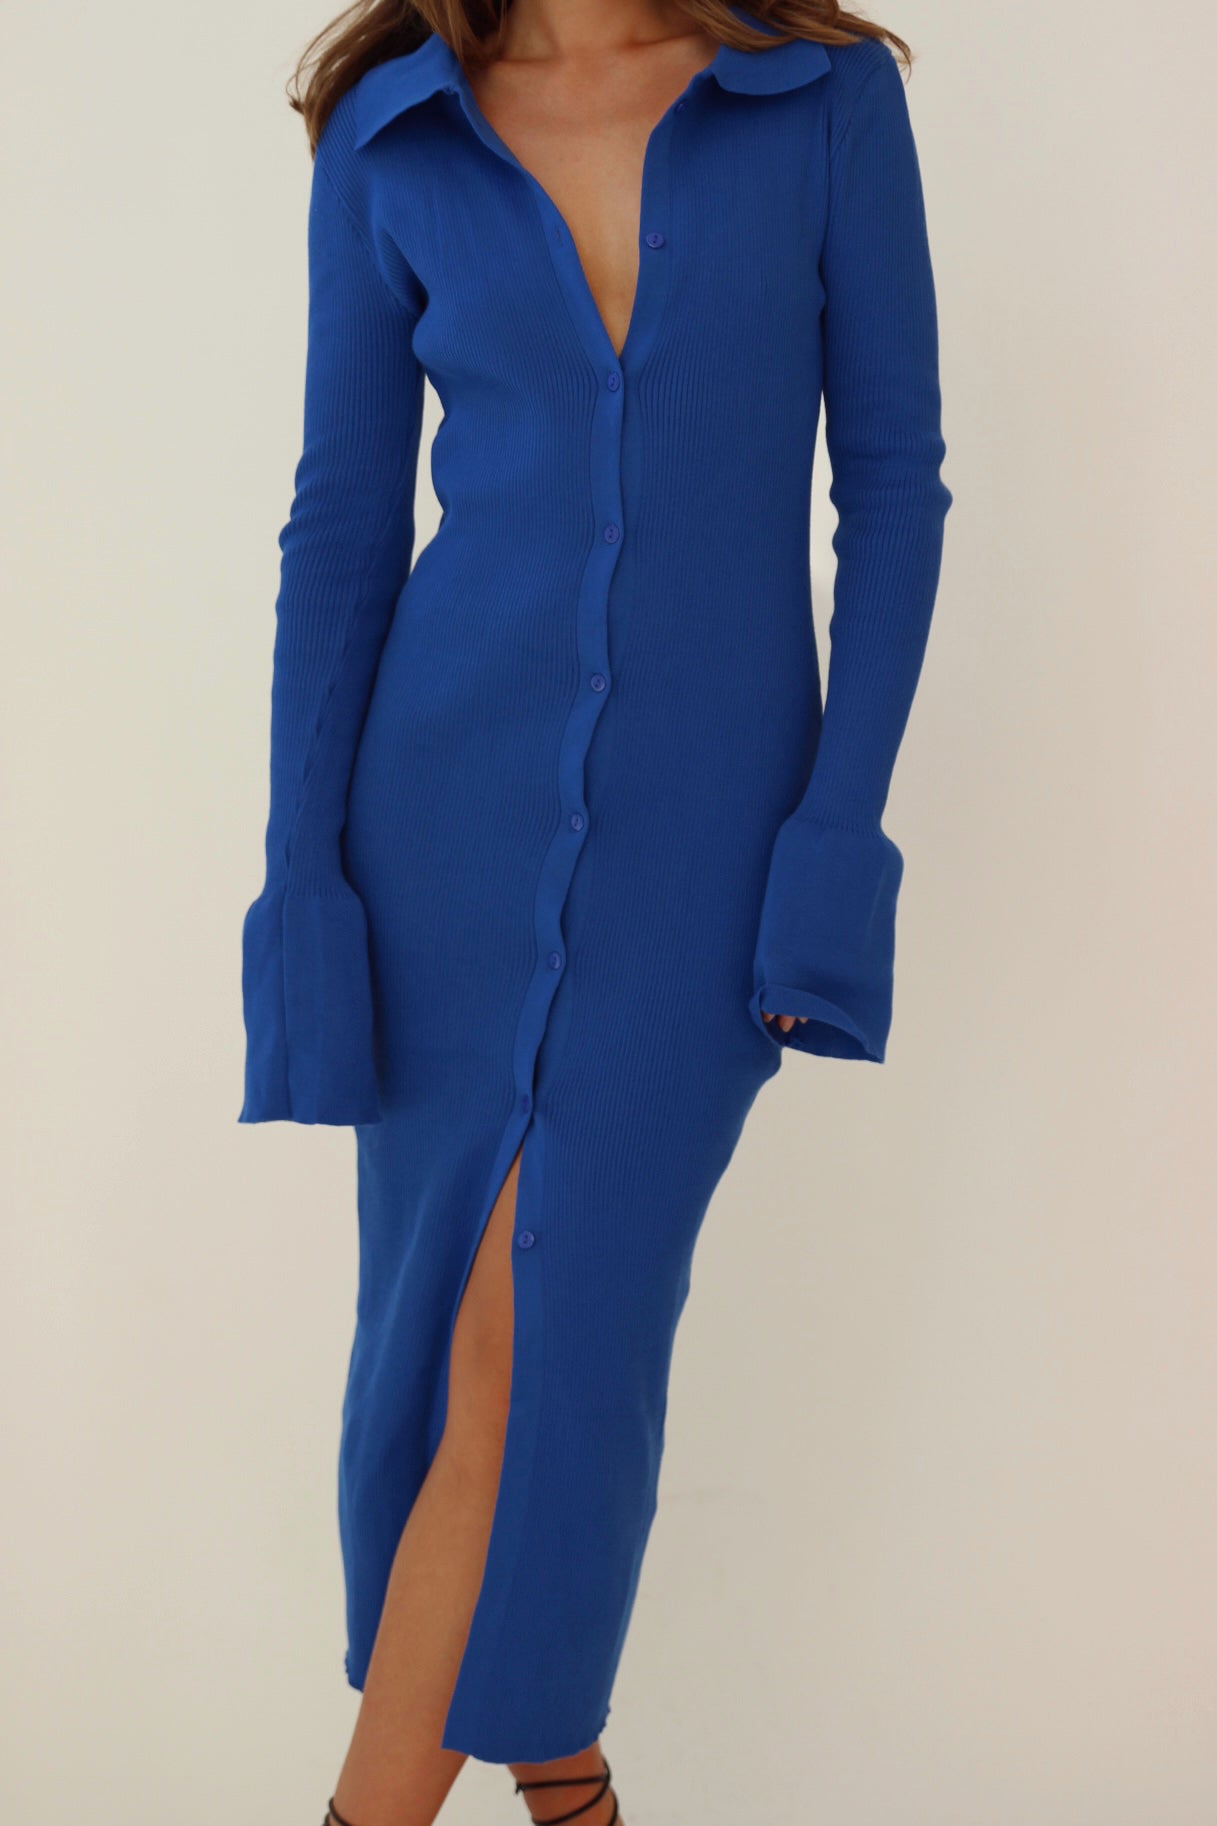  Blue Rib Knitted Collared Midi Dress from Chouette Club 